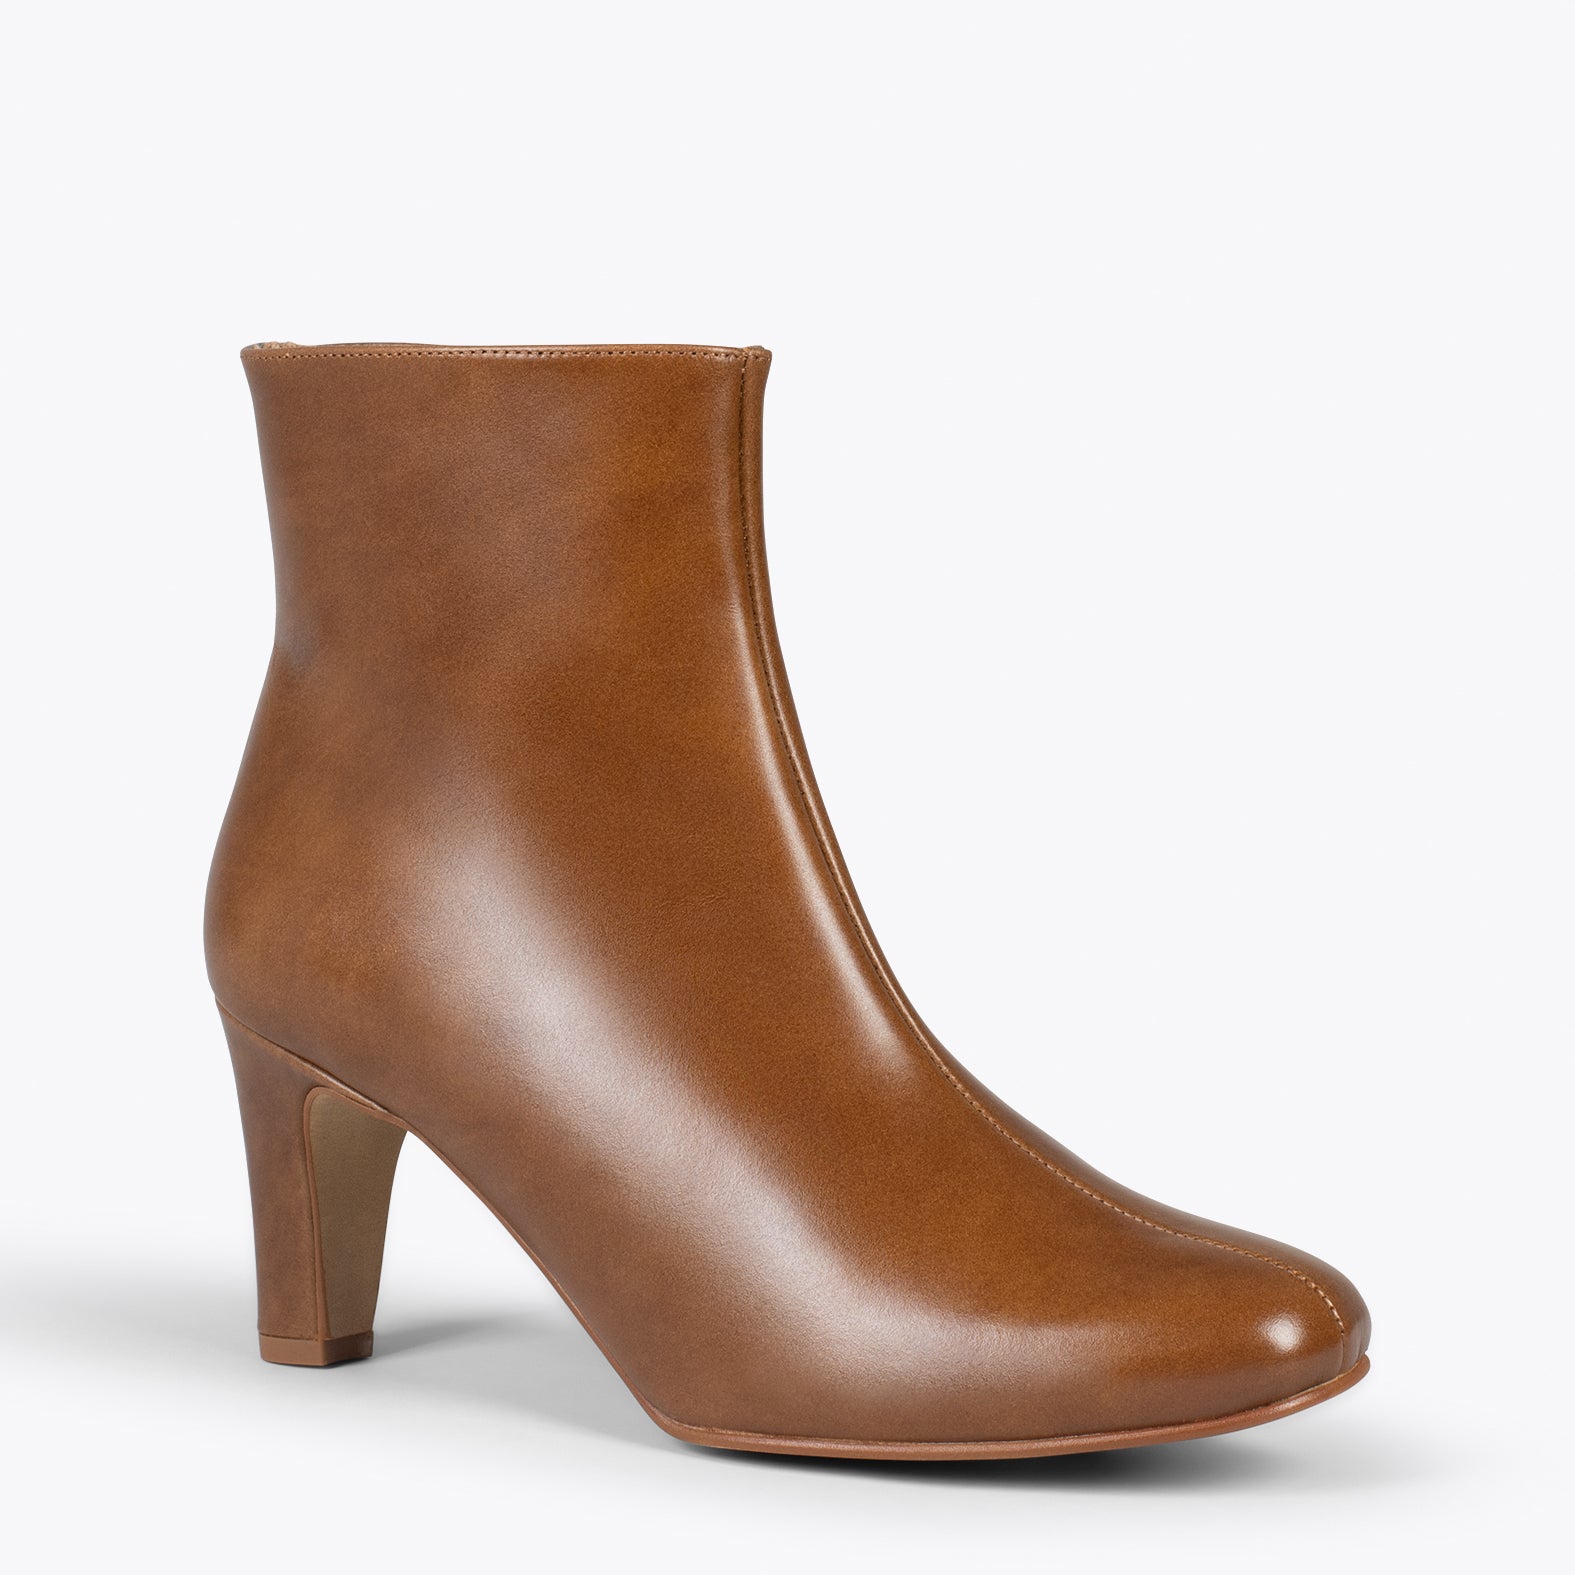 DAILY – CAMEL leather bootie